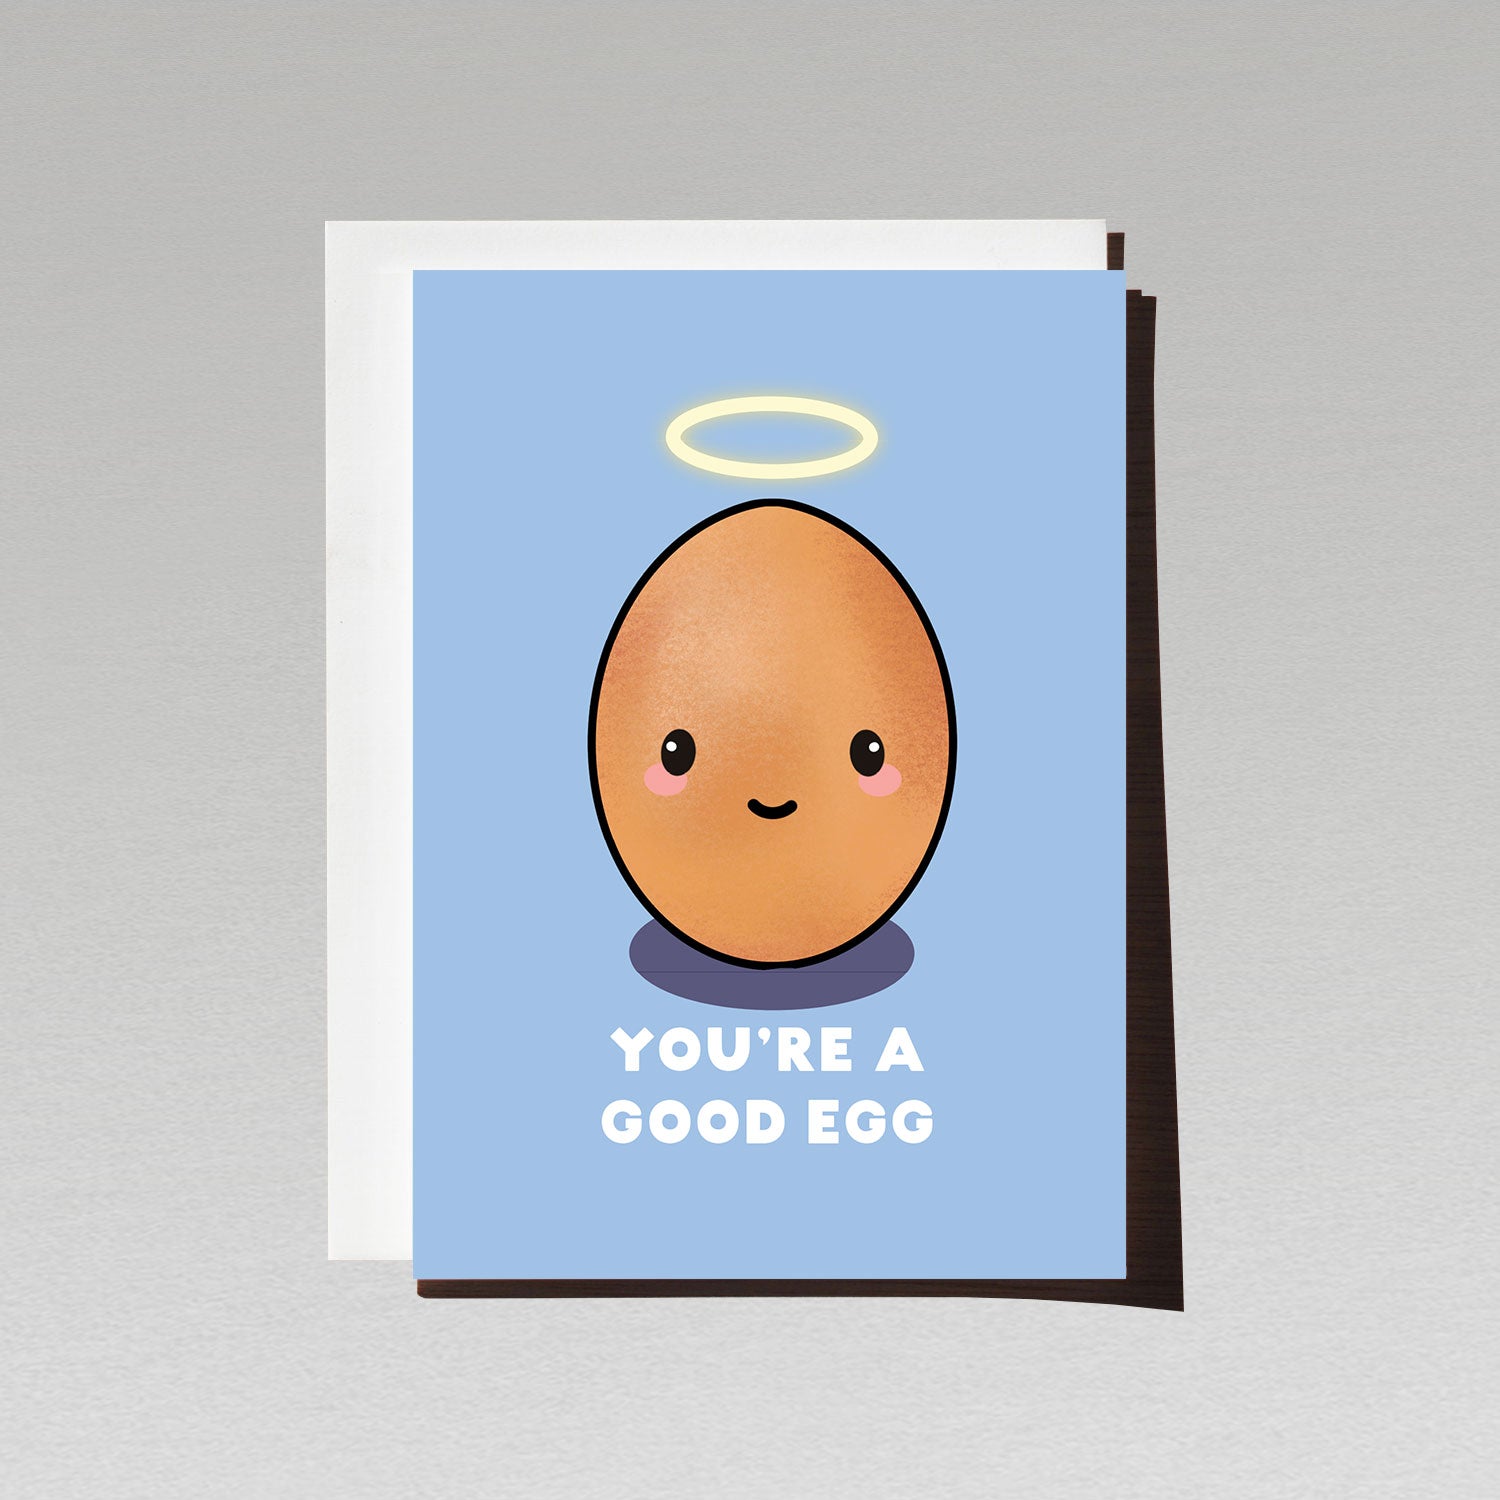 Greeting card with cute smiling brown egg character with angel halo on blue background with text You're a good egg